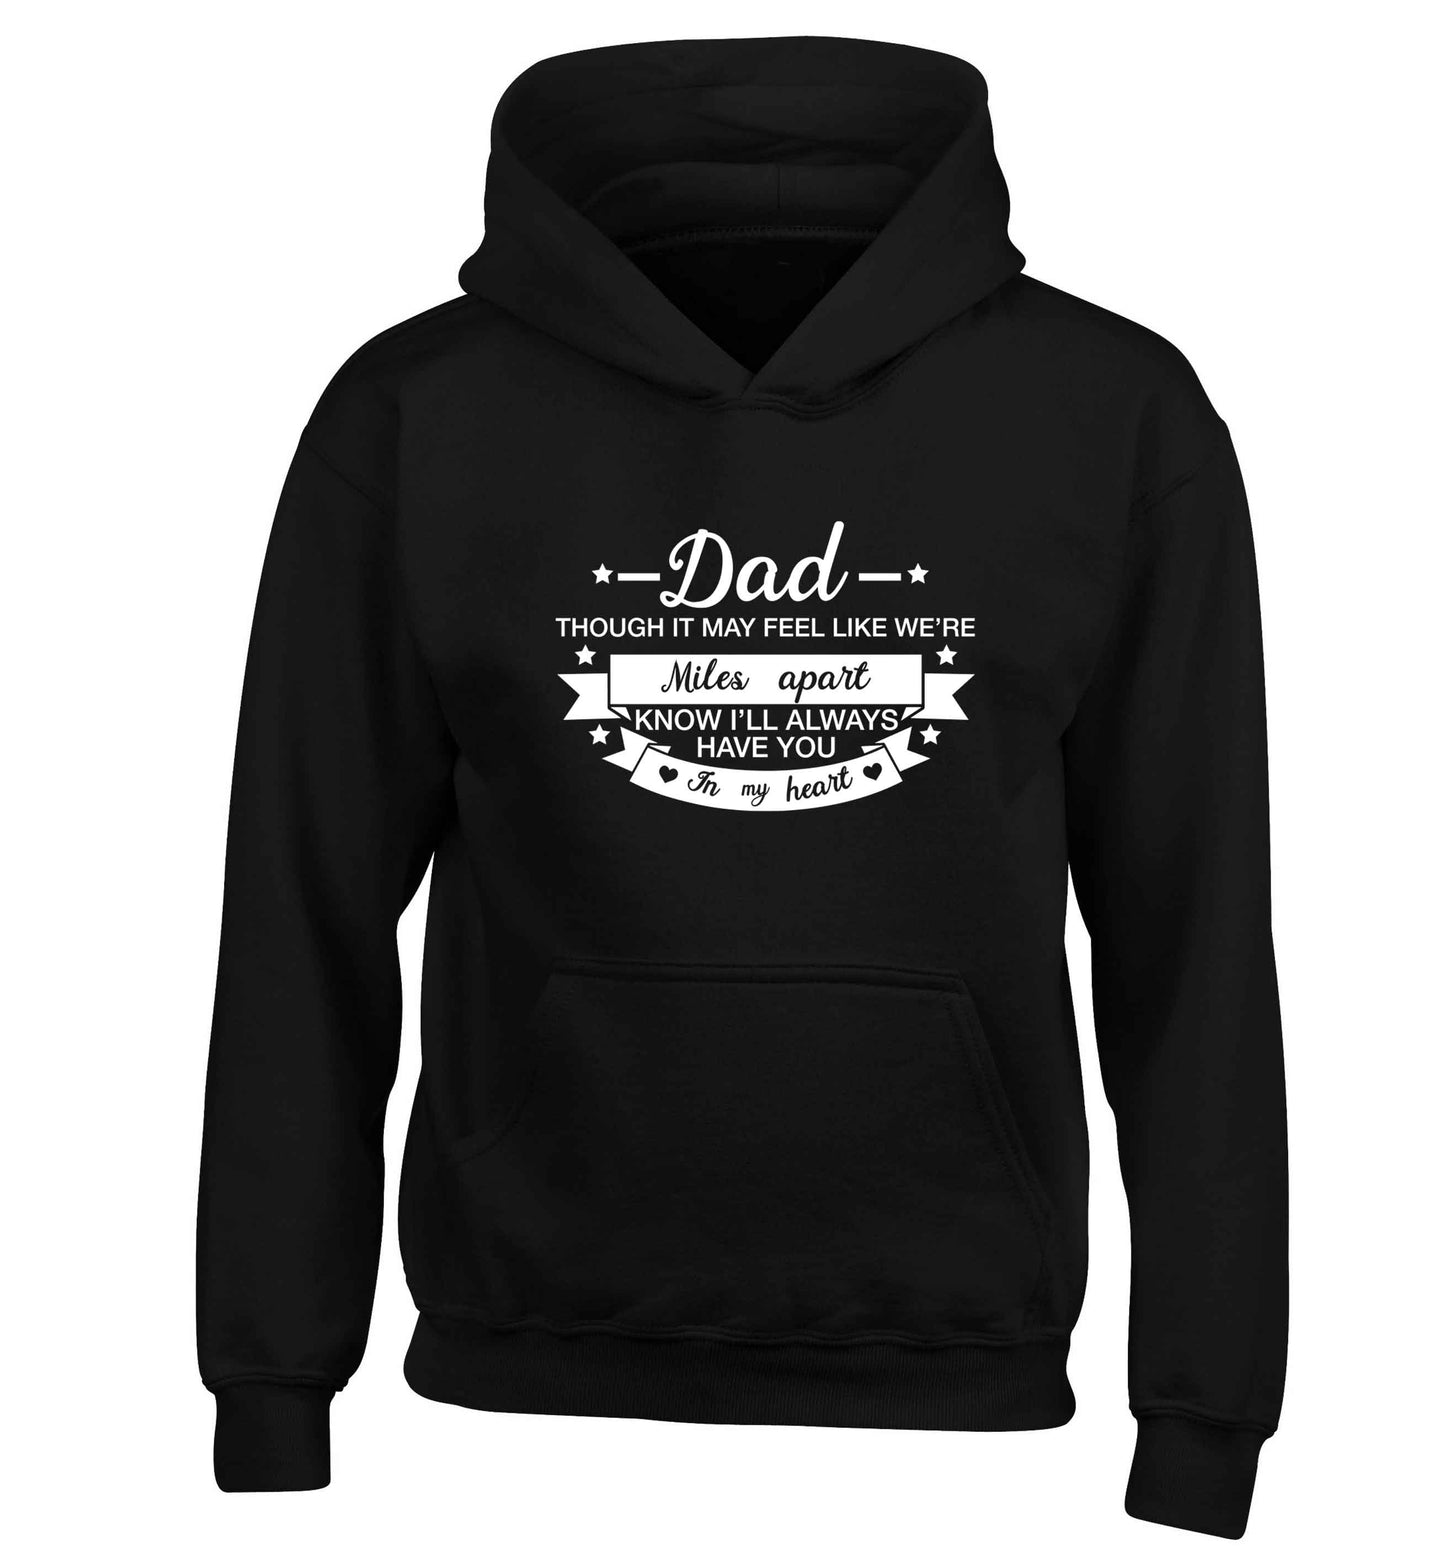 Dad though it may feel like we're miles apart know I'll always have you in my heart children's black hoodie 12-13 Years